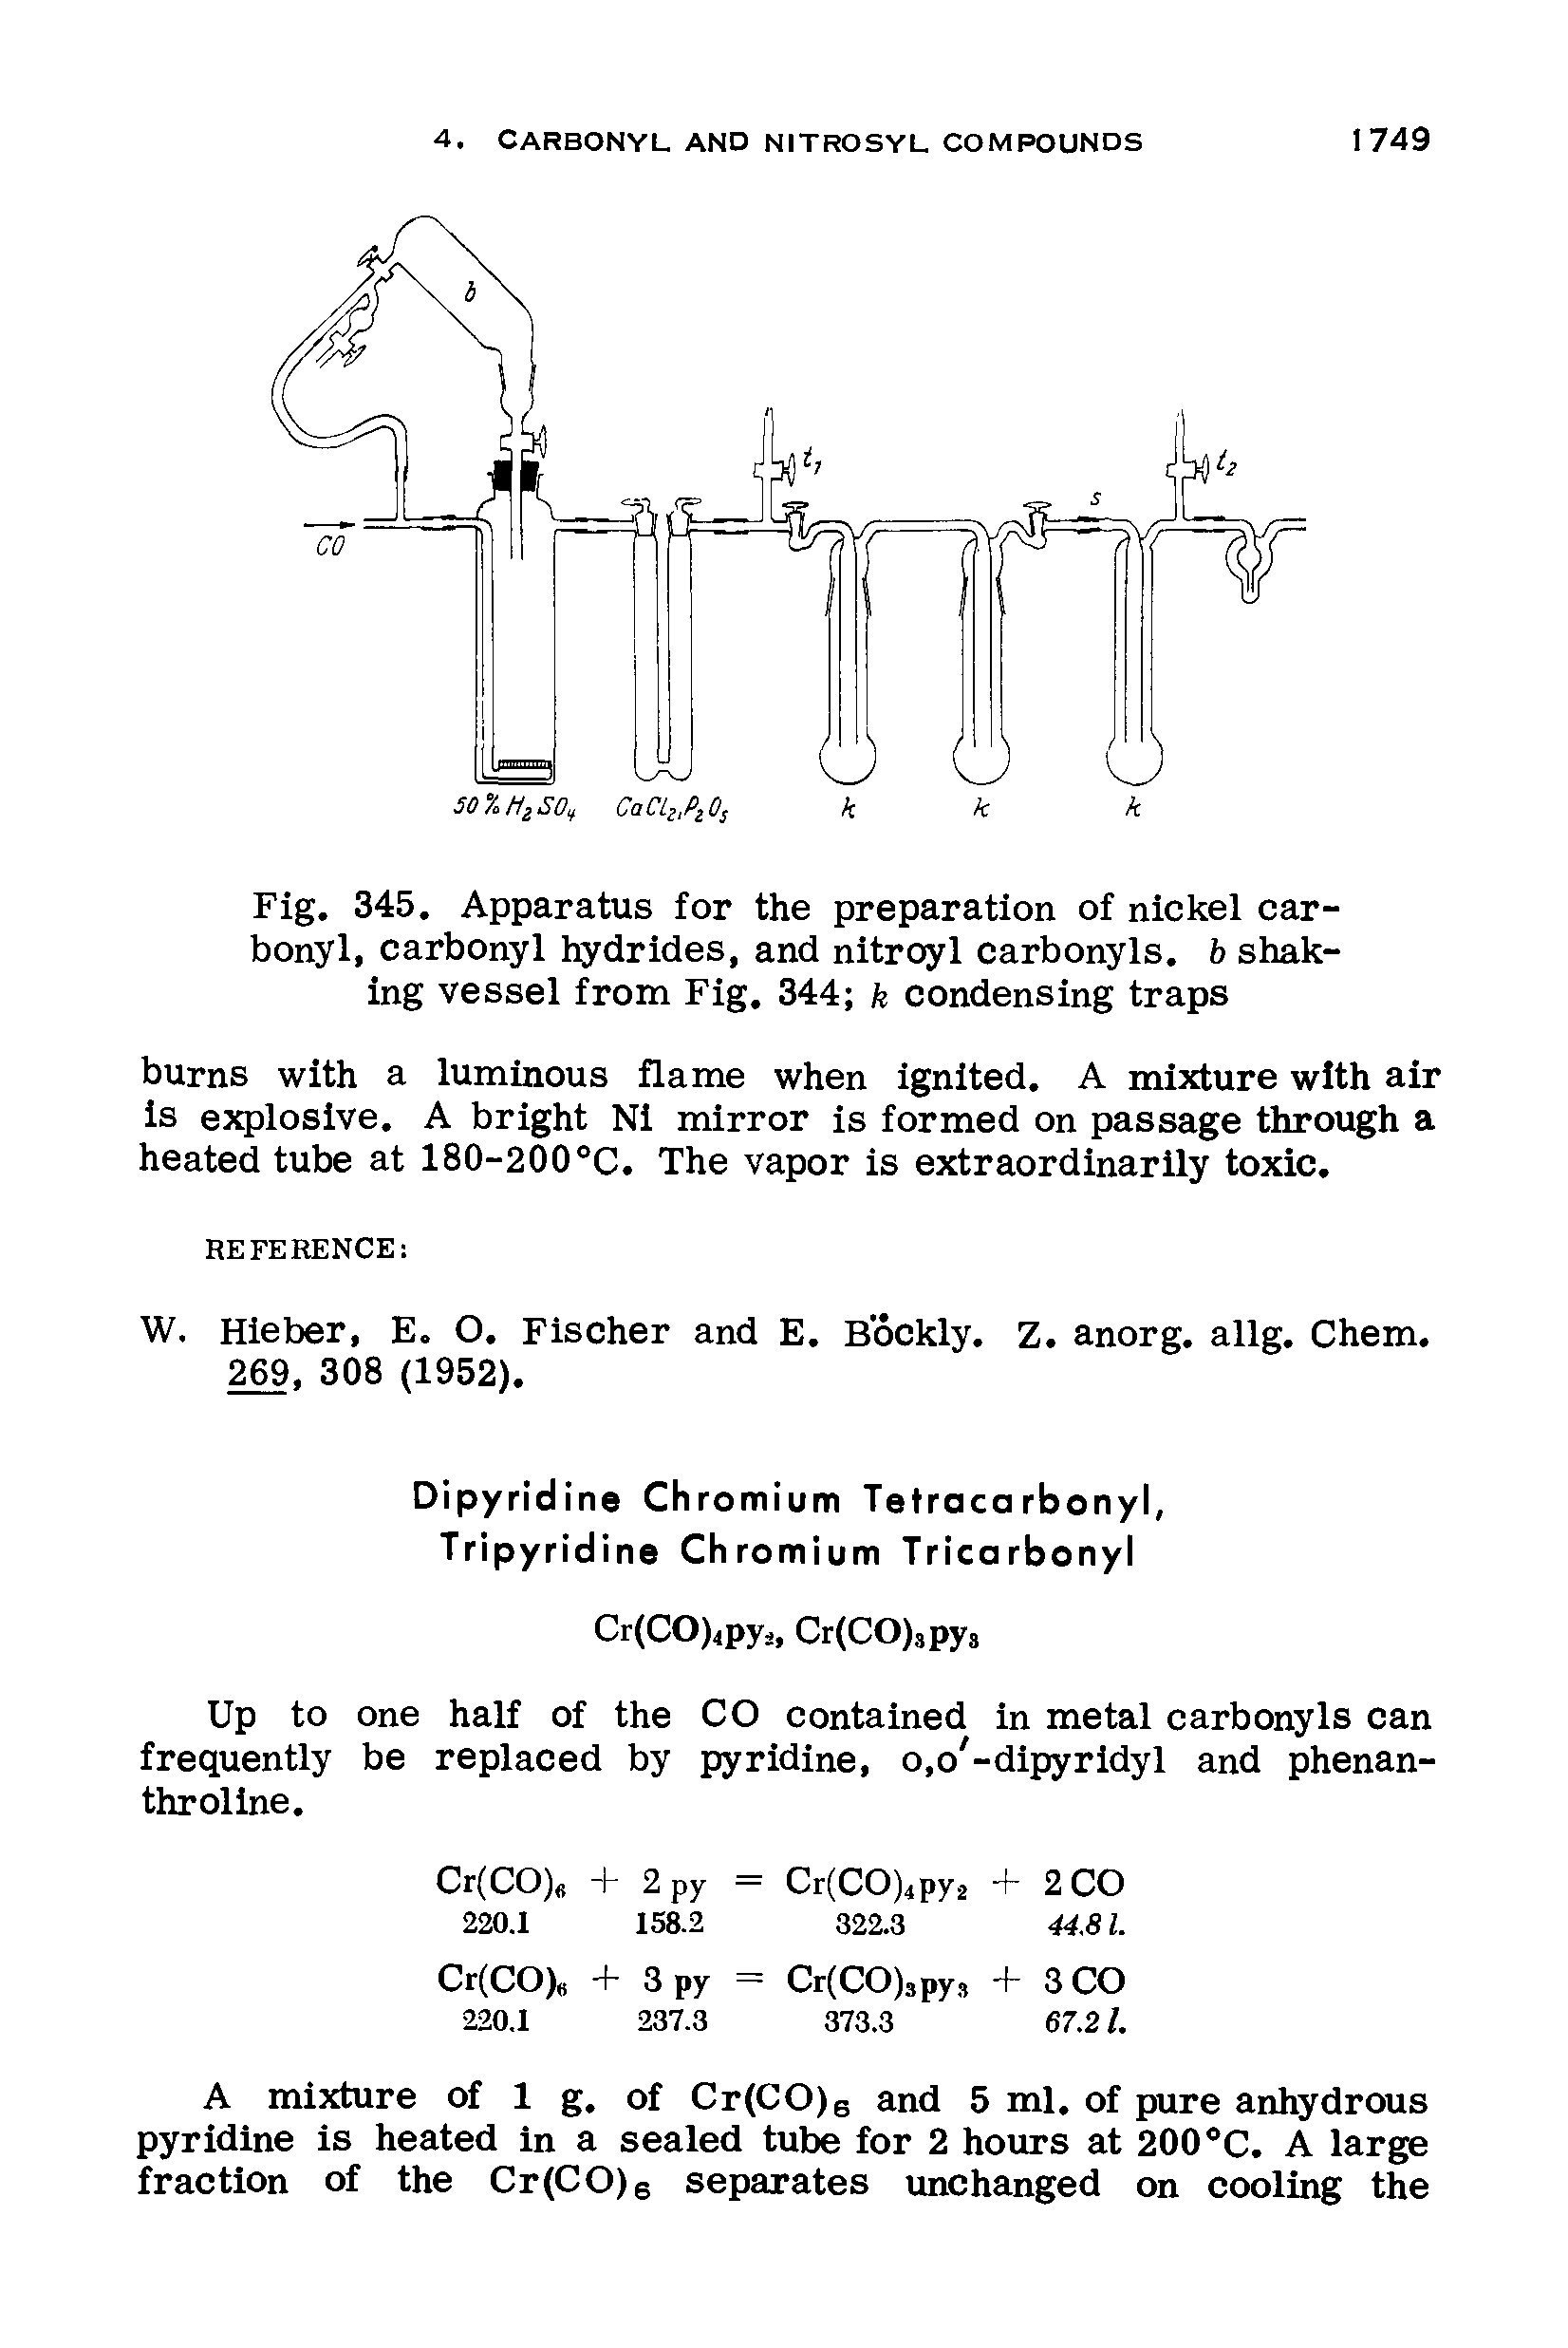 Fig. 345. Apparatus for the preparation of nickel carbonyl, carbonyl hydrides, and nitroyl carbonyls, b shaking vessel from Fig. 344 k condensing traps...